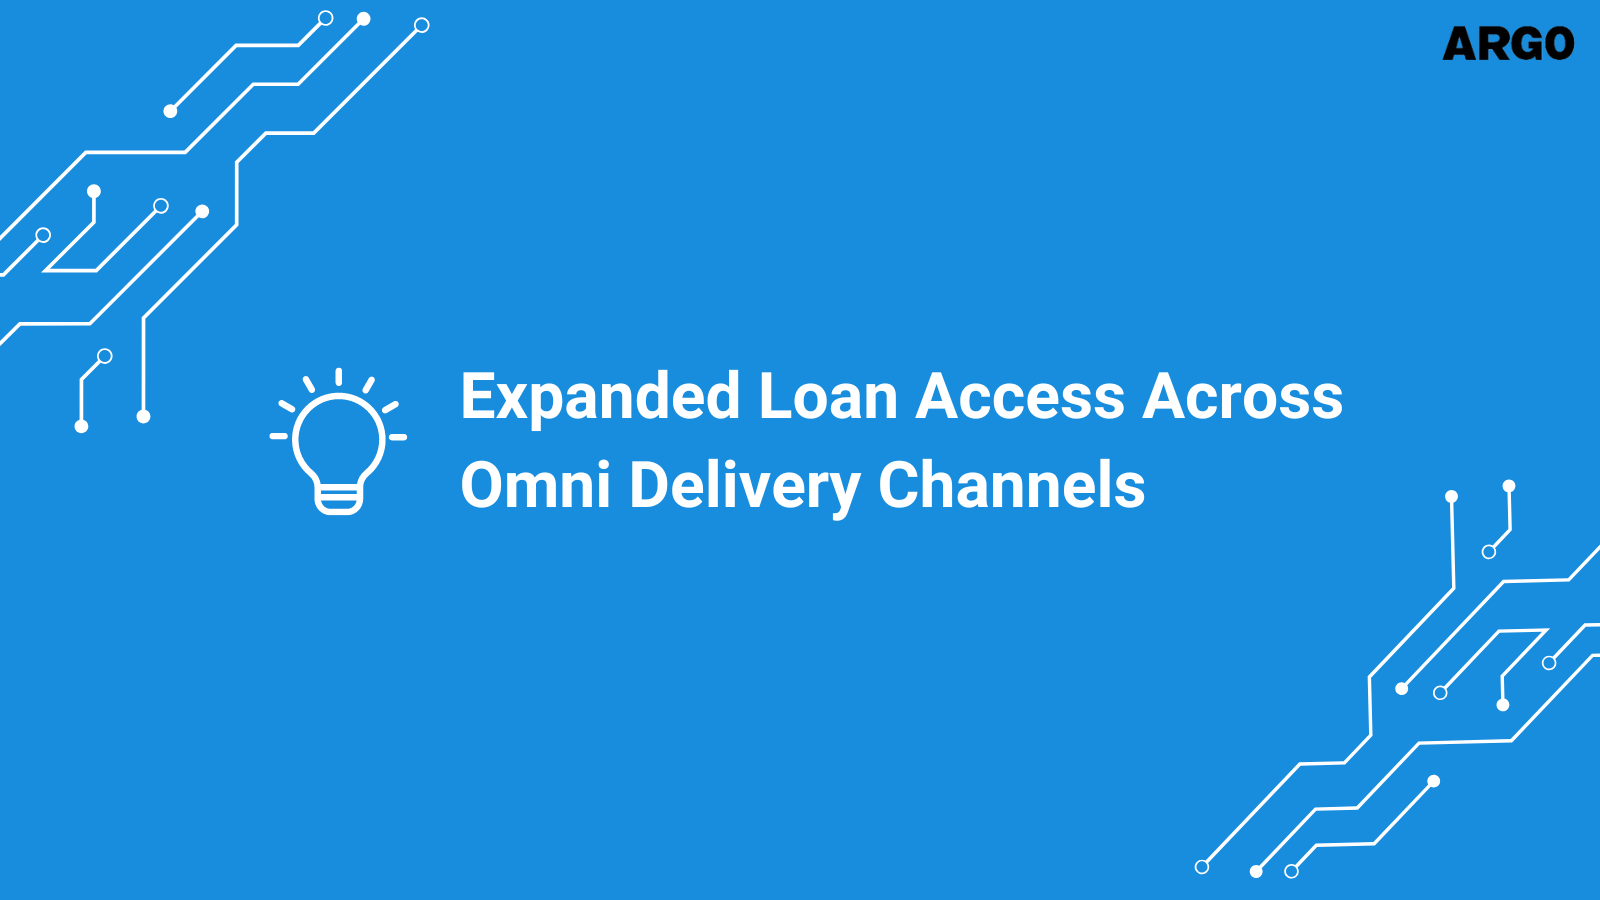 Expanded Loan Access Across Omni Delivery Channels